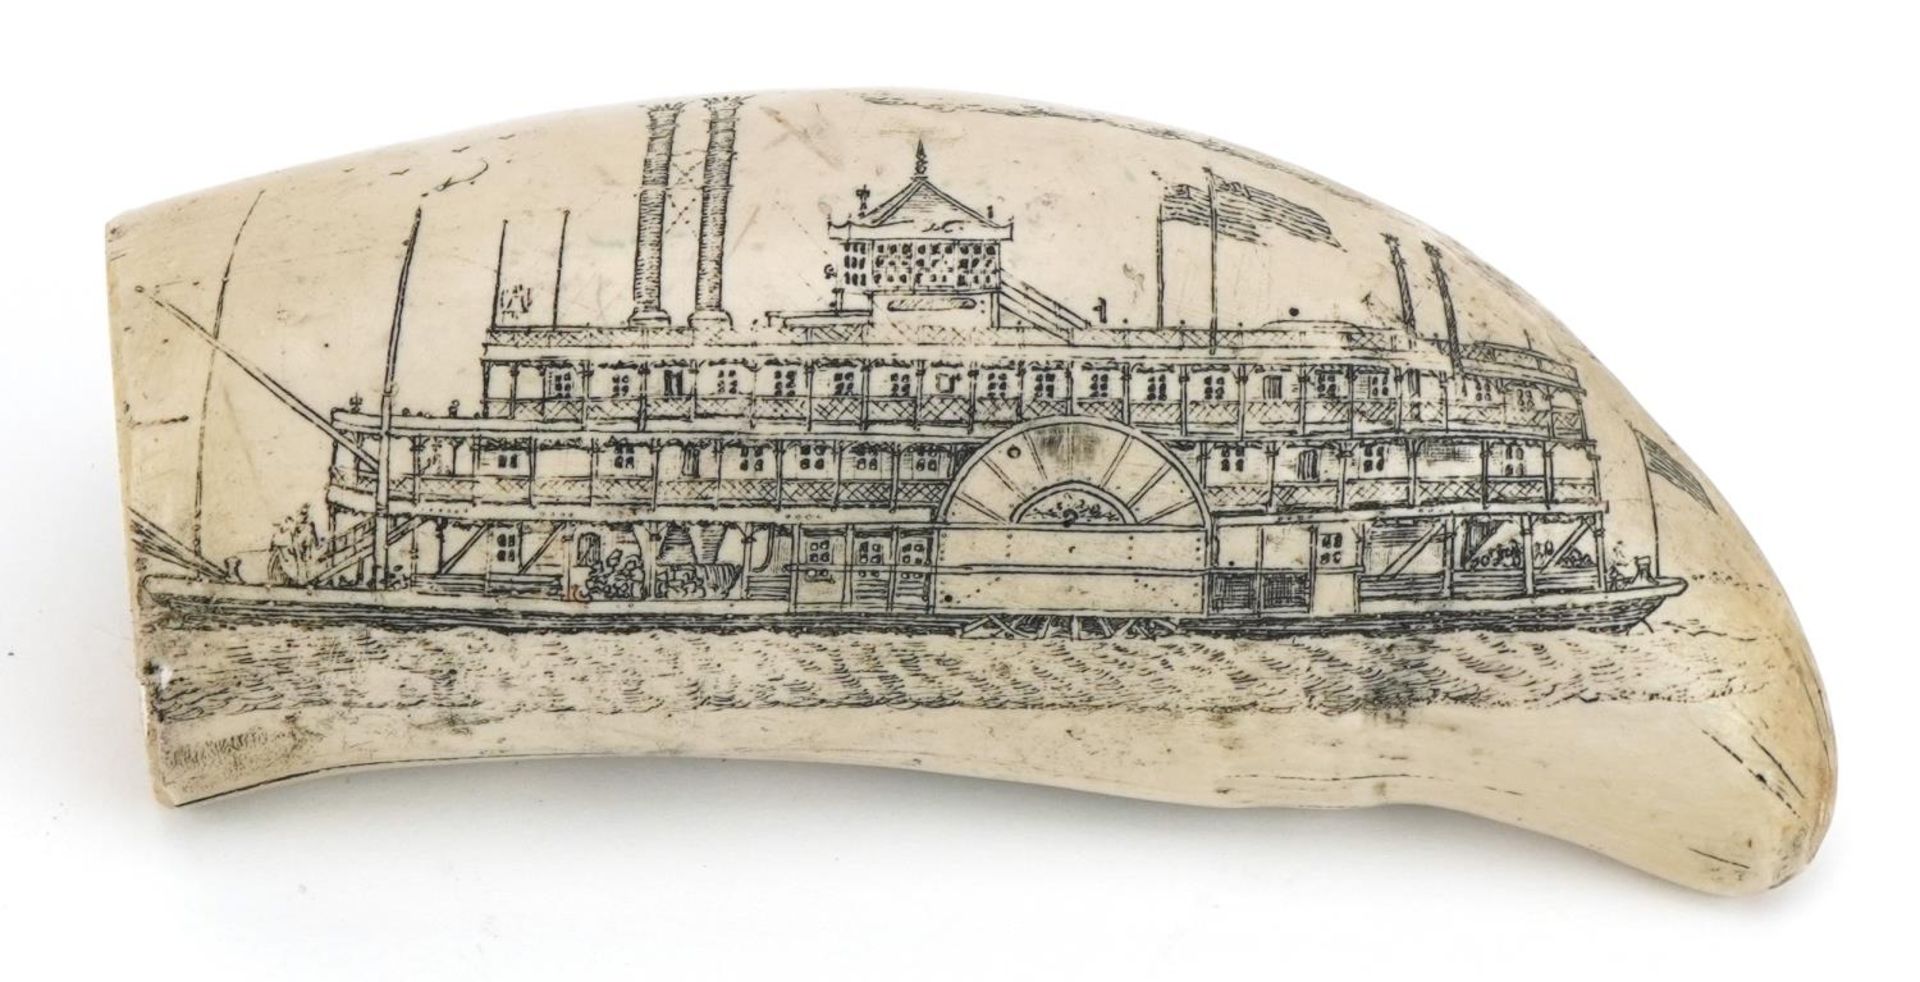 Reproduction scrimshaw tusk decorated with a ship and landscape, 15cm wide : For further information